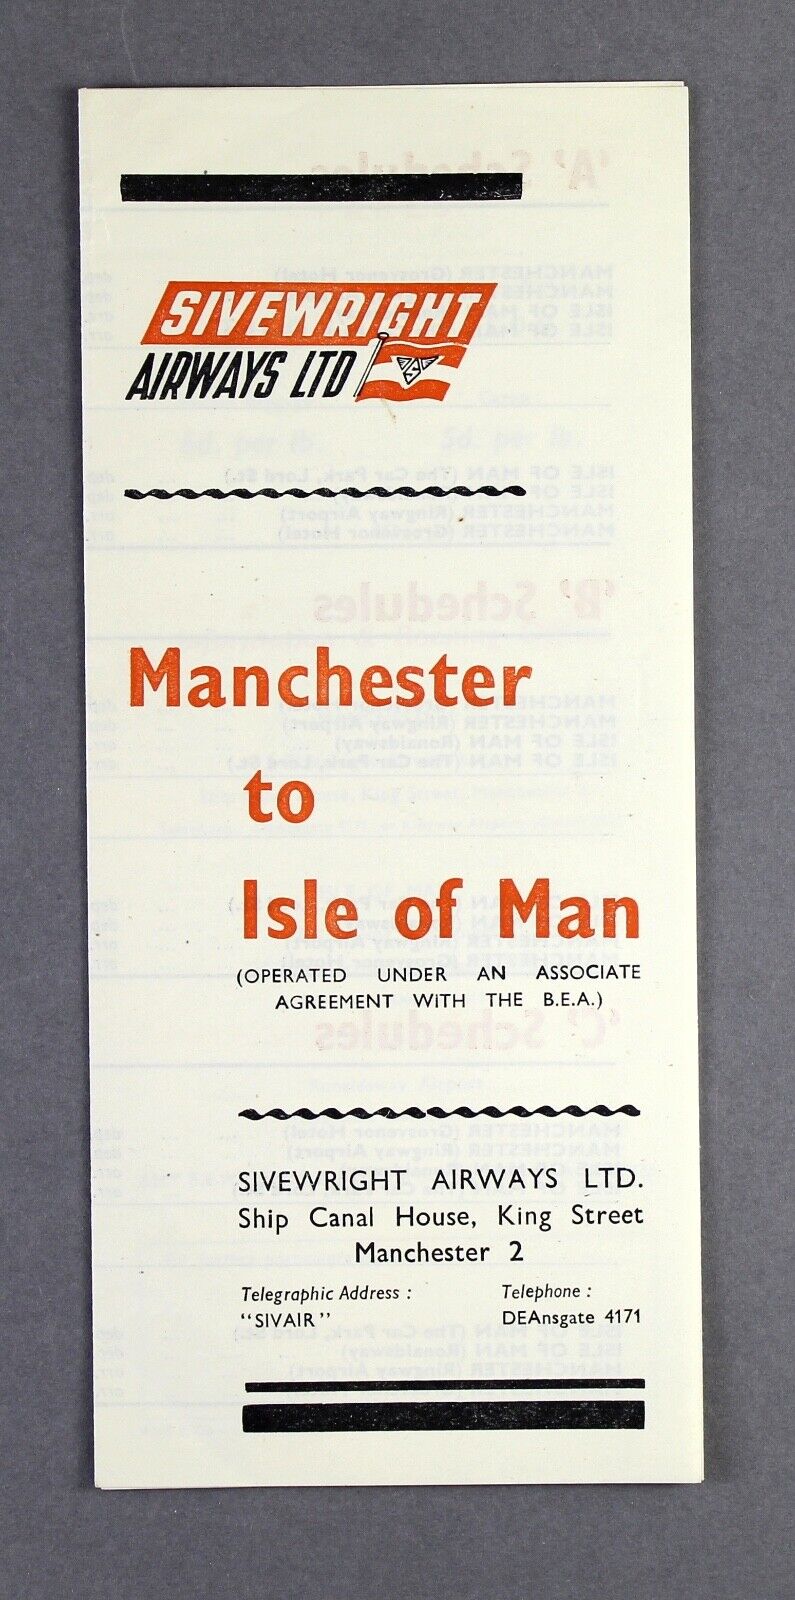 SIVEWRIGHT AIRWAYS AIRLINE TIMETABLE 1949 - MANCHESTER - ISLE OF MAN  